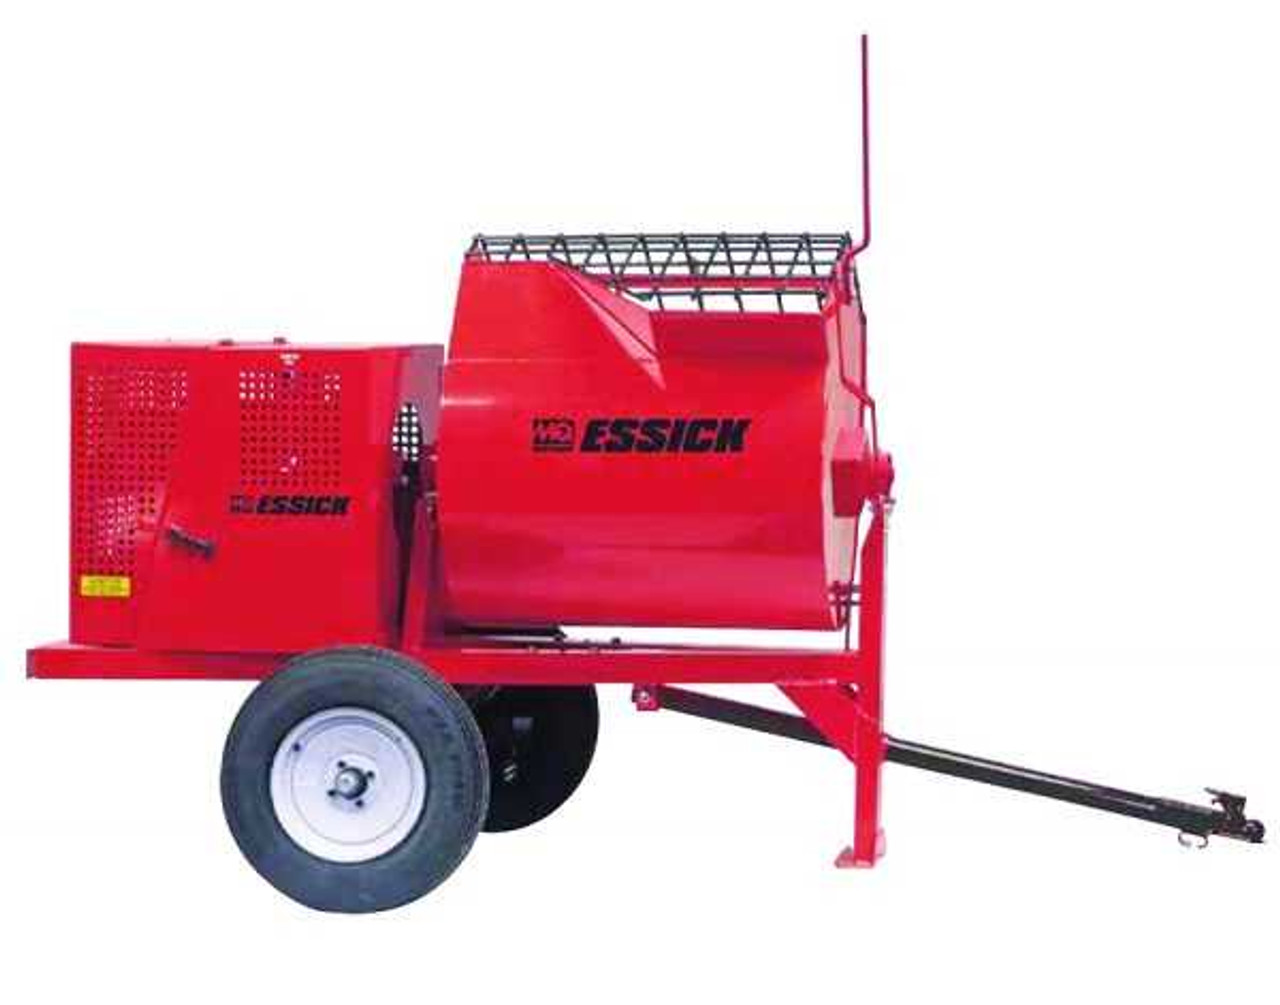 https://cdn11.bigcommerce.com/s-zve1rn6vor/images/stencil/1280x1280/products/240/1237/12-Cubic-Foot-Mechanical-Mortar-Mixer-Essick-Southwest-Scaffolding-Supply-Co_481__74154.1695738587.jpg?c=1?imbypass=on